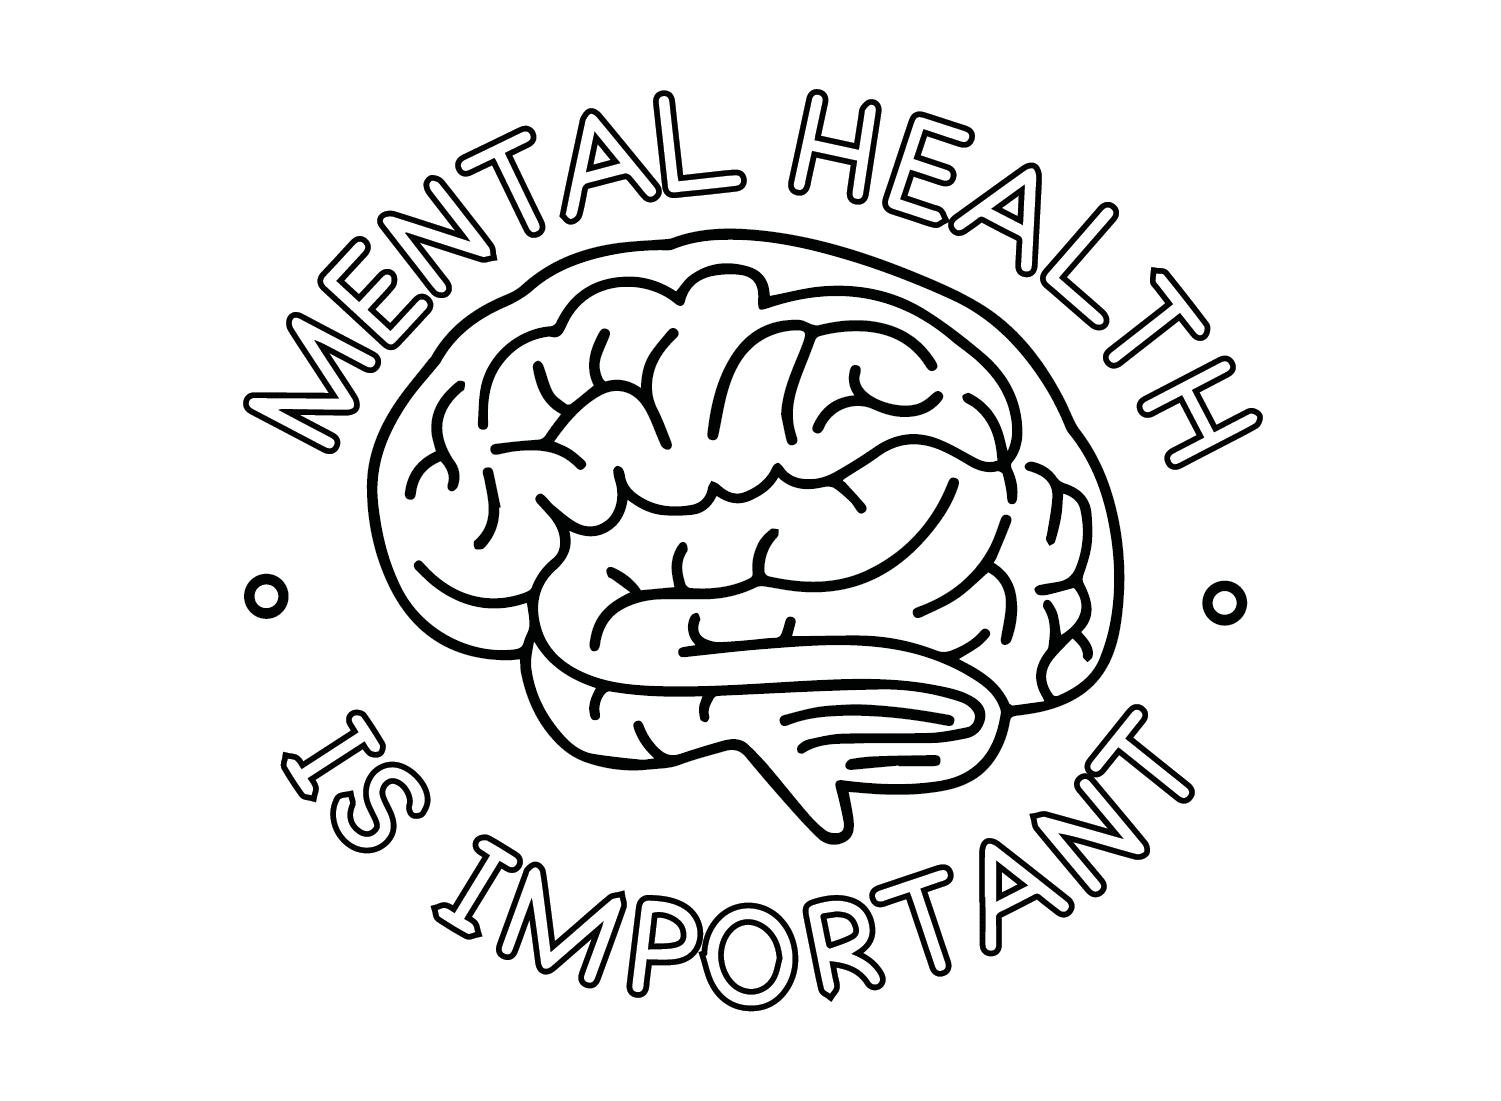 Mental Health is Important Coloring Page